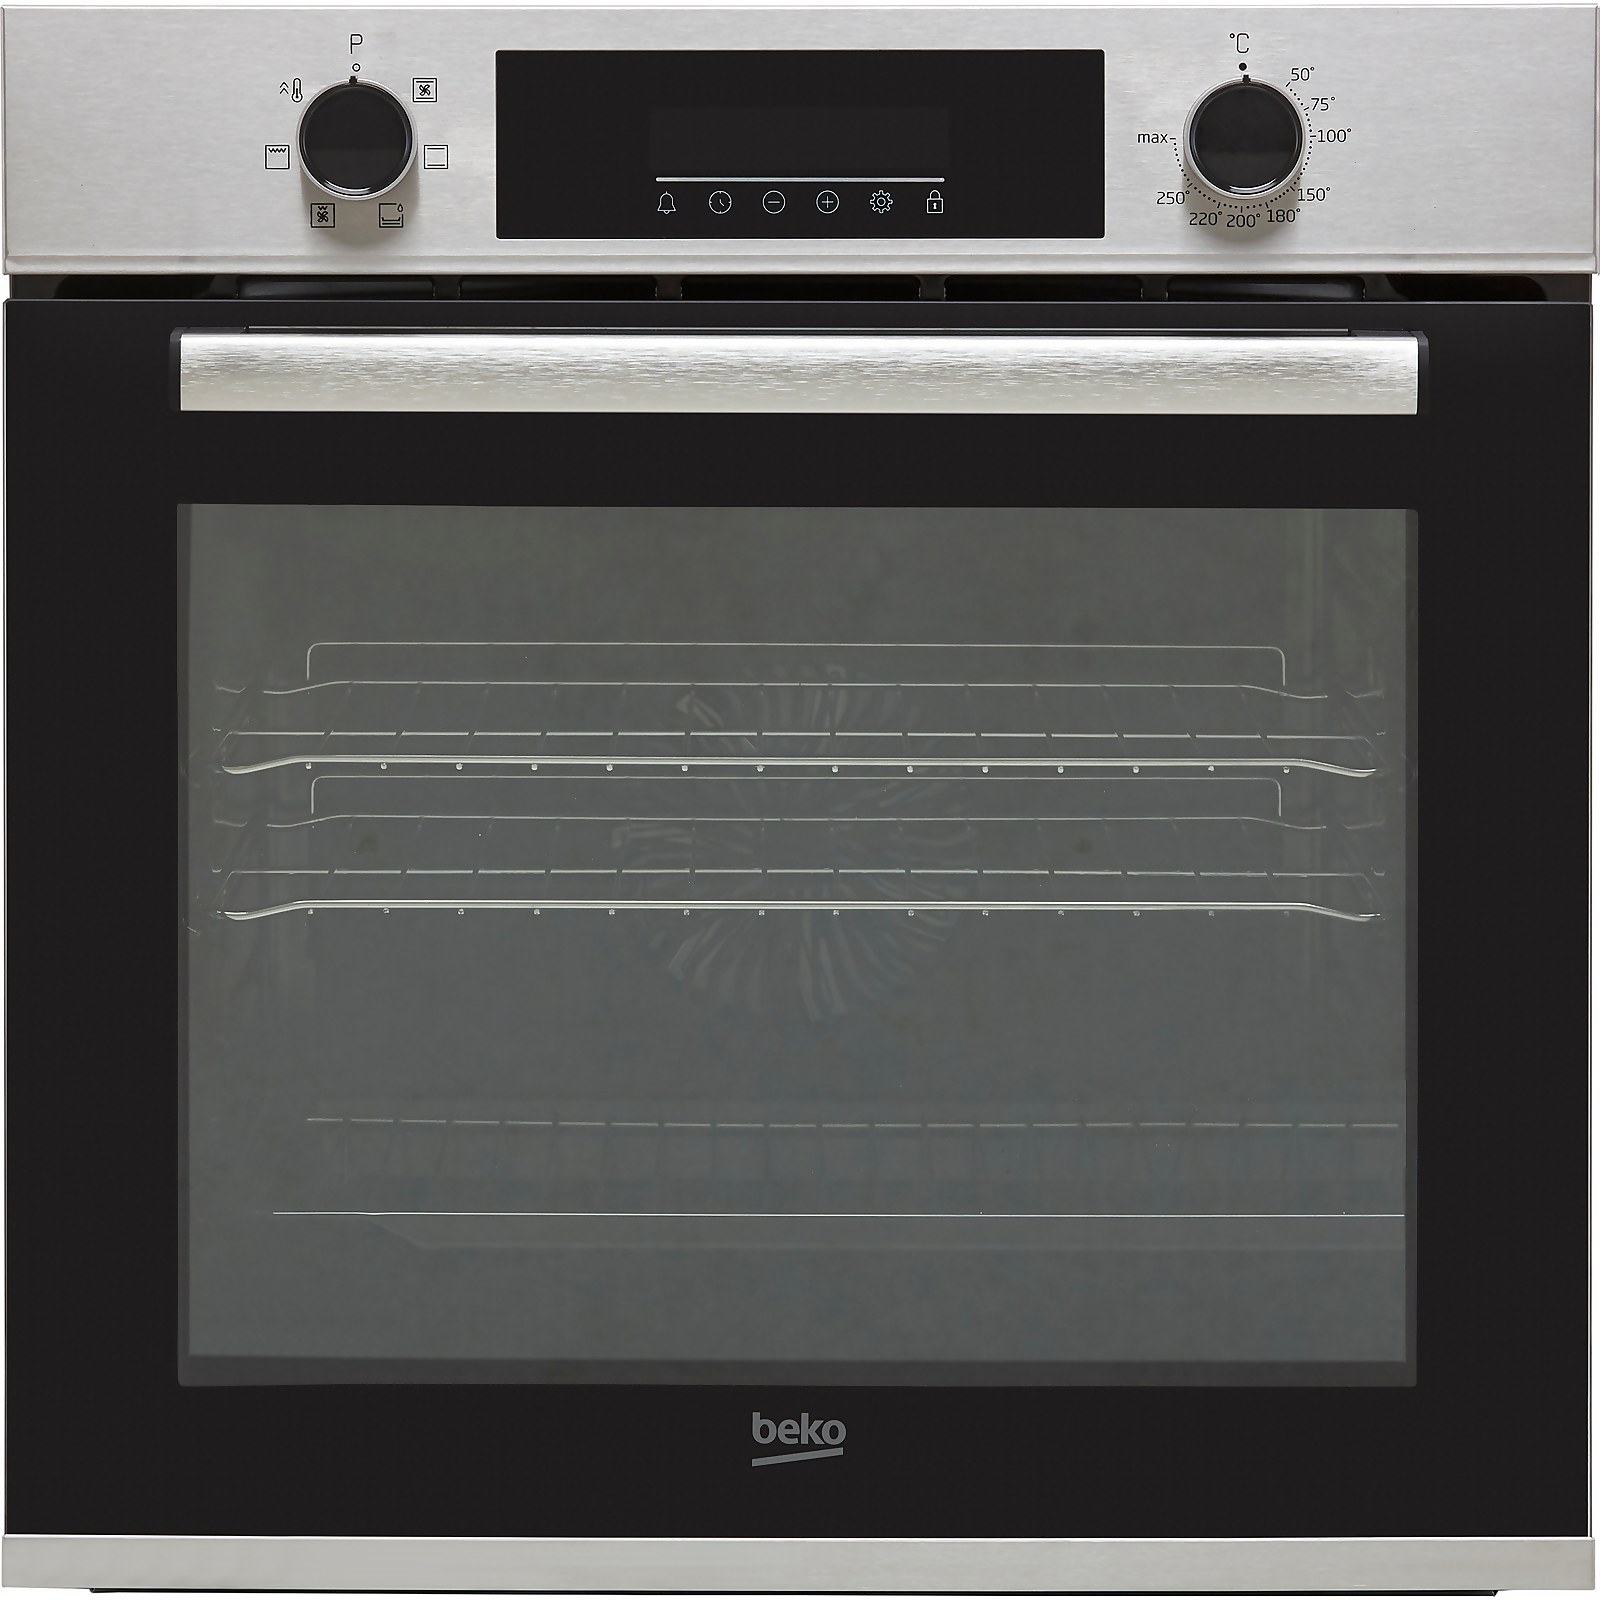 Beko AeroPerfect RecycledNet BBRIE22300XD Built In Electric Single Oven - Stainless Steel